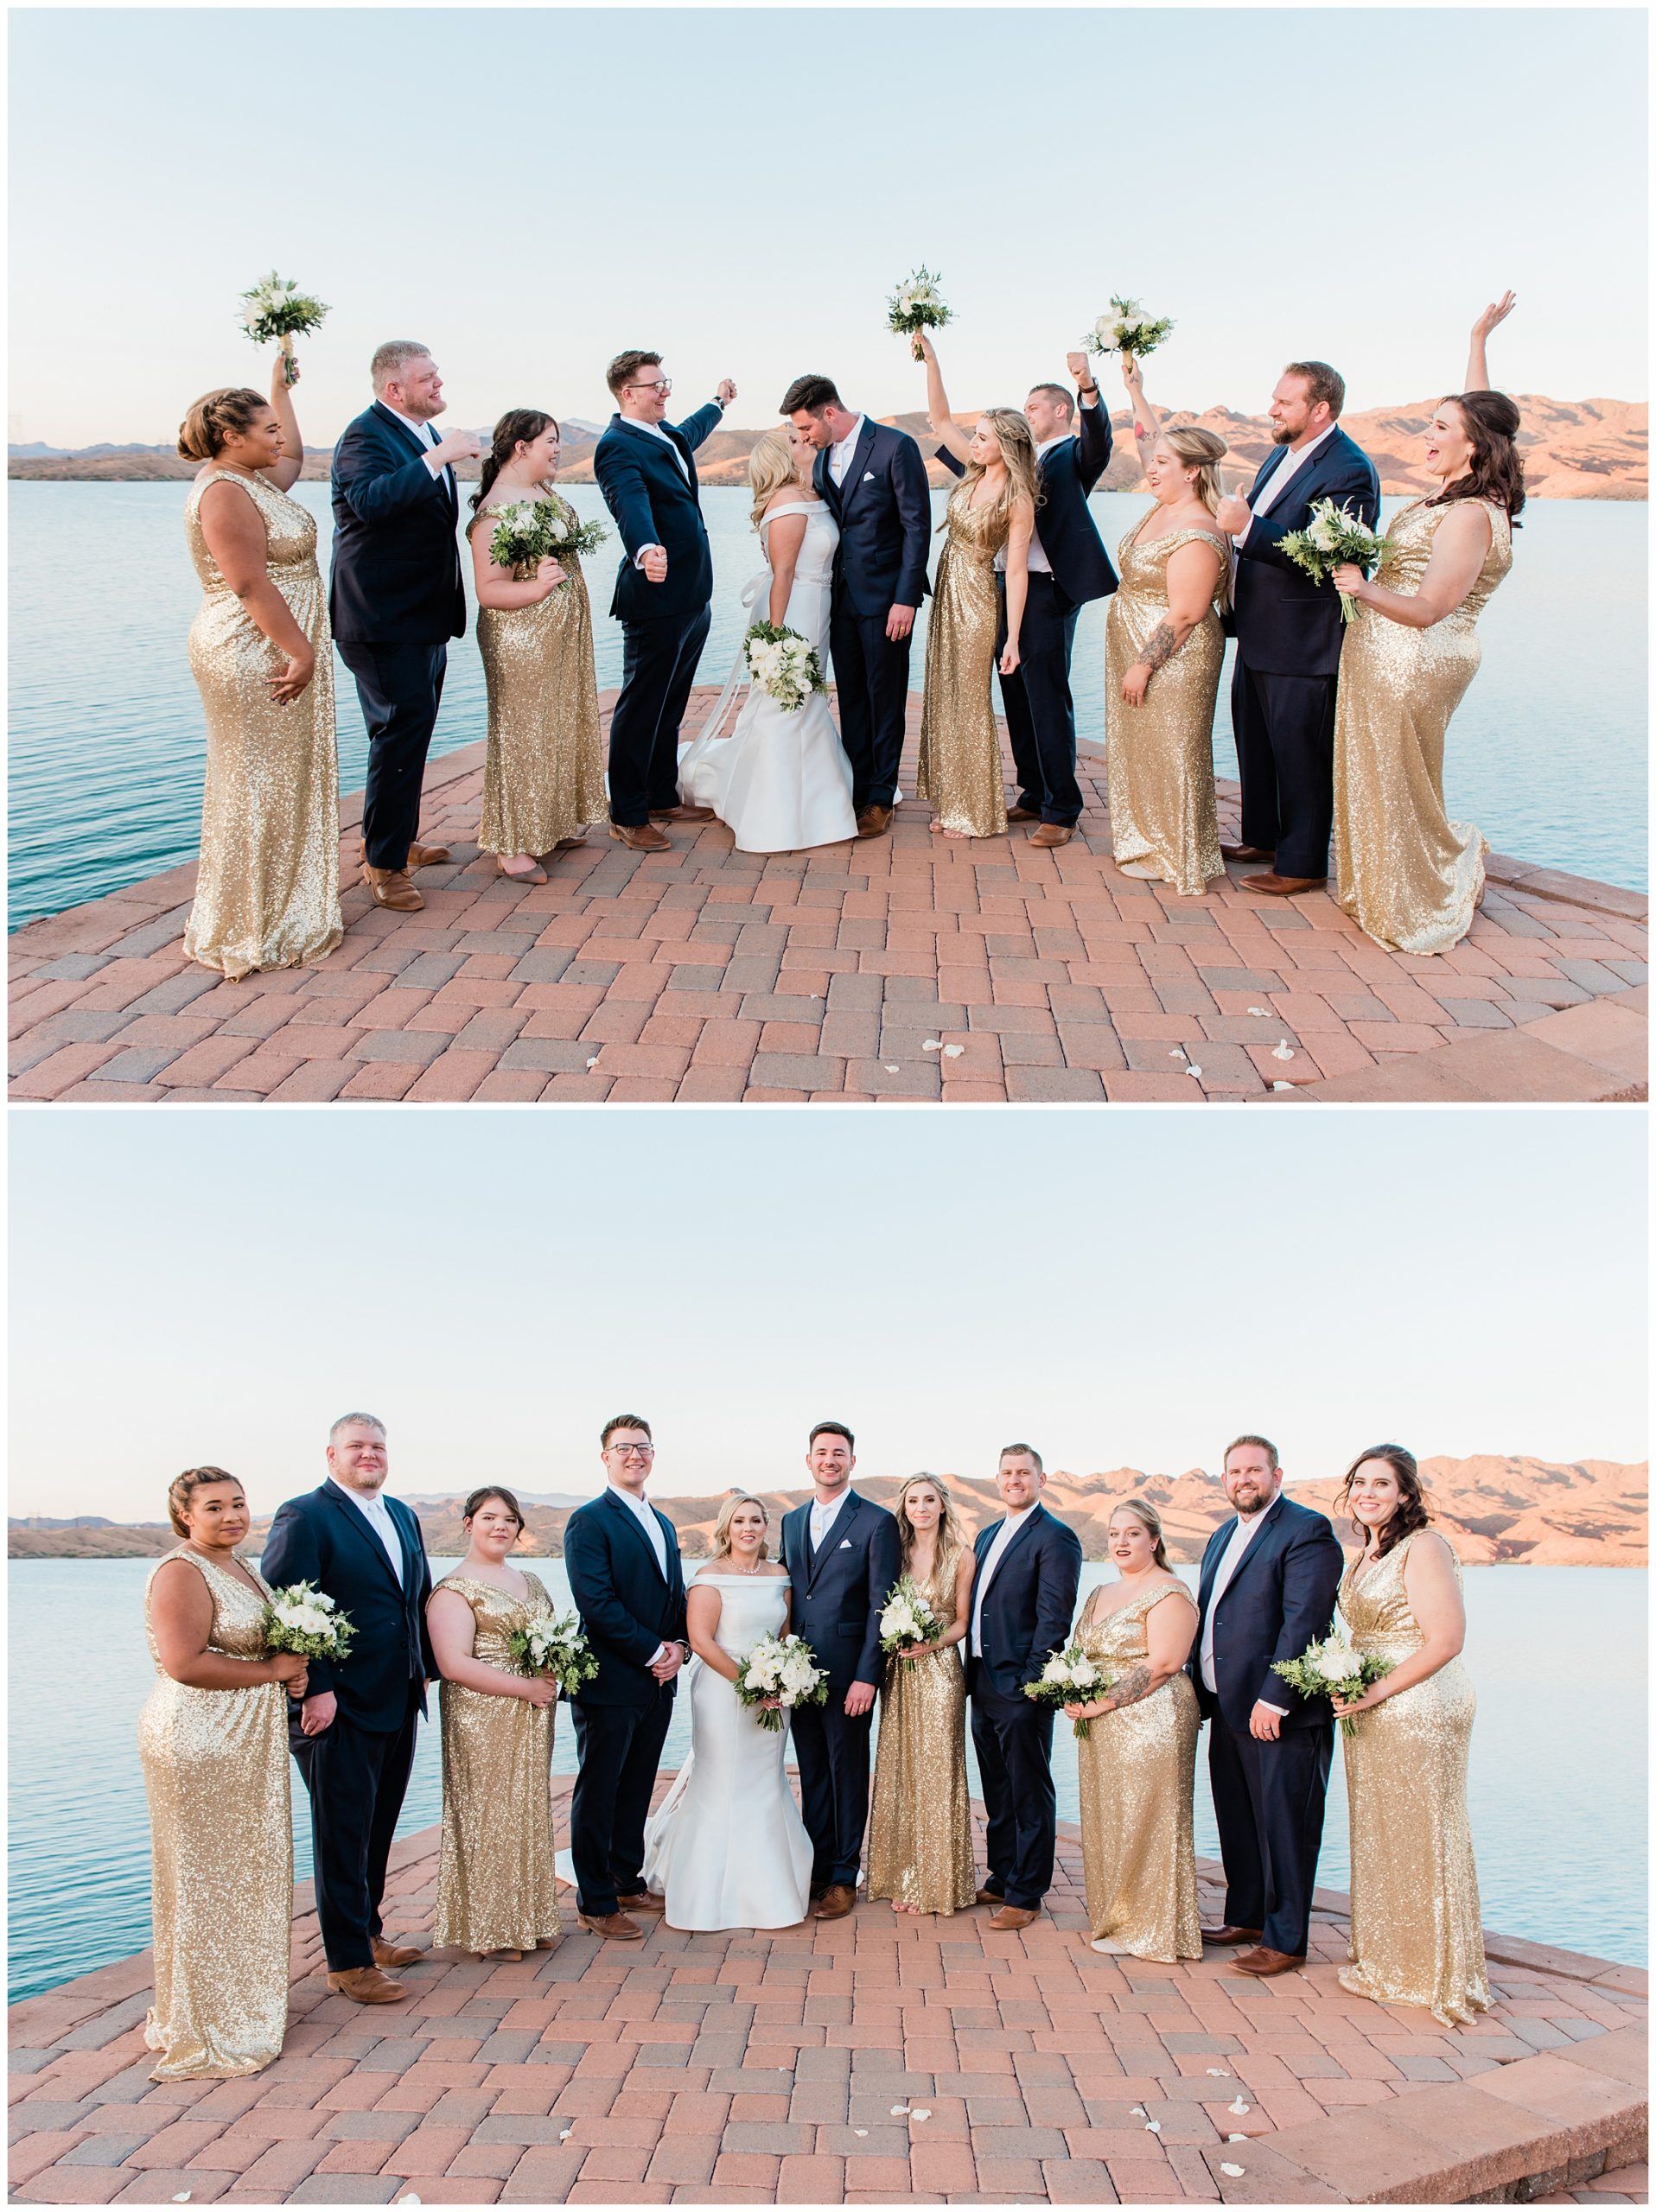 a wedding party celebrating while bride and groom kiss in the middle